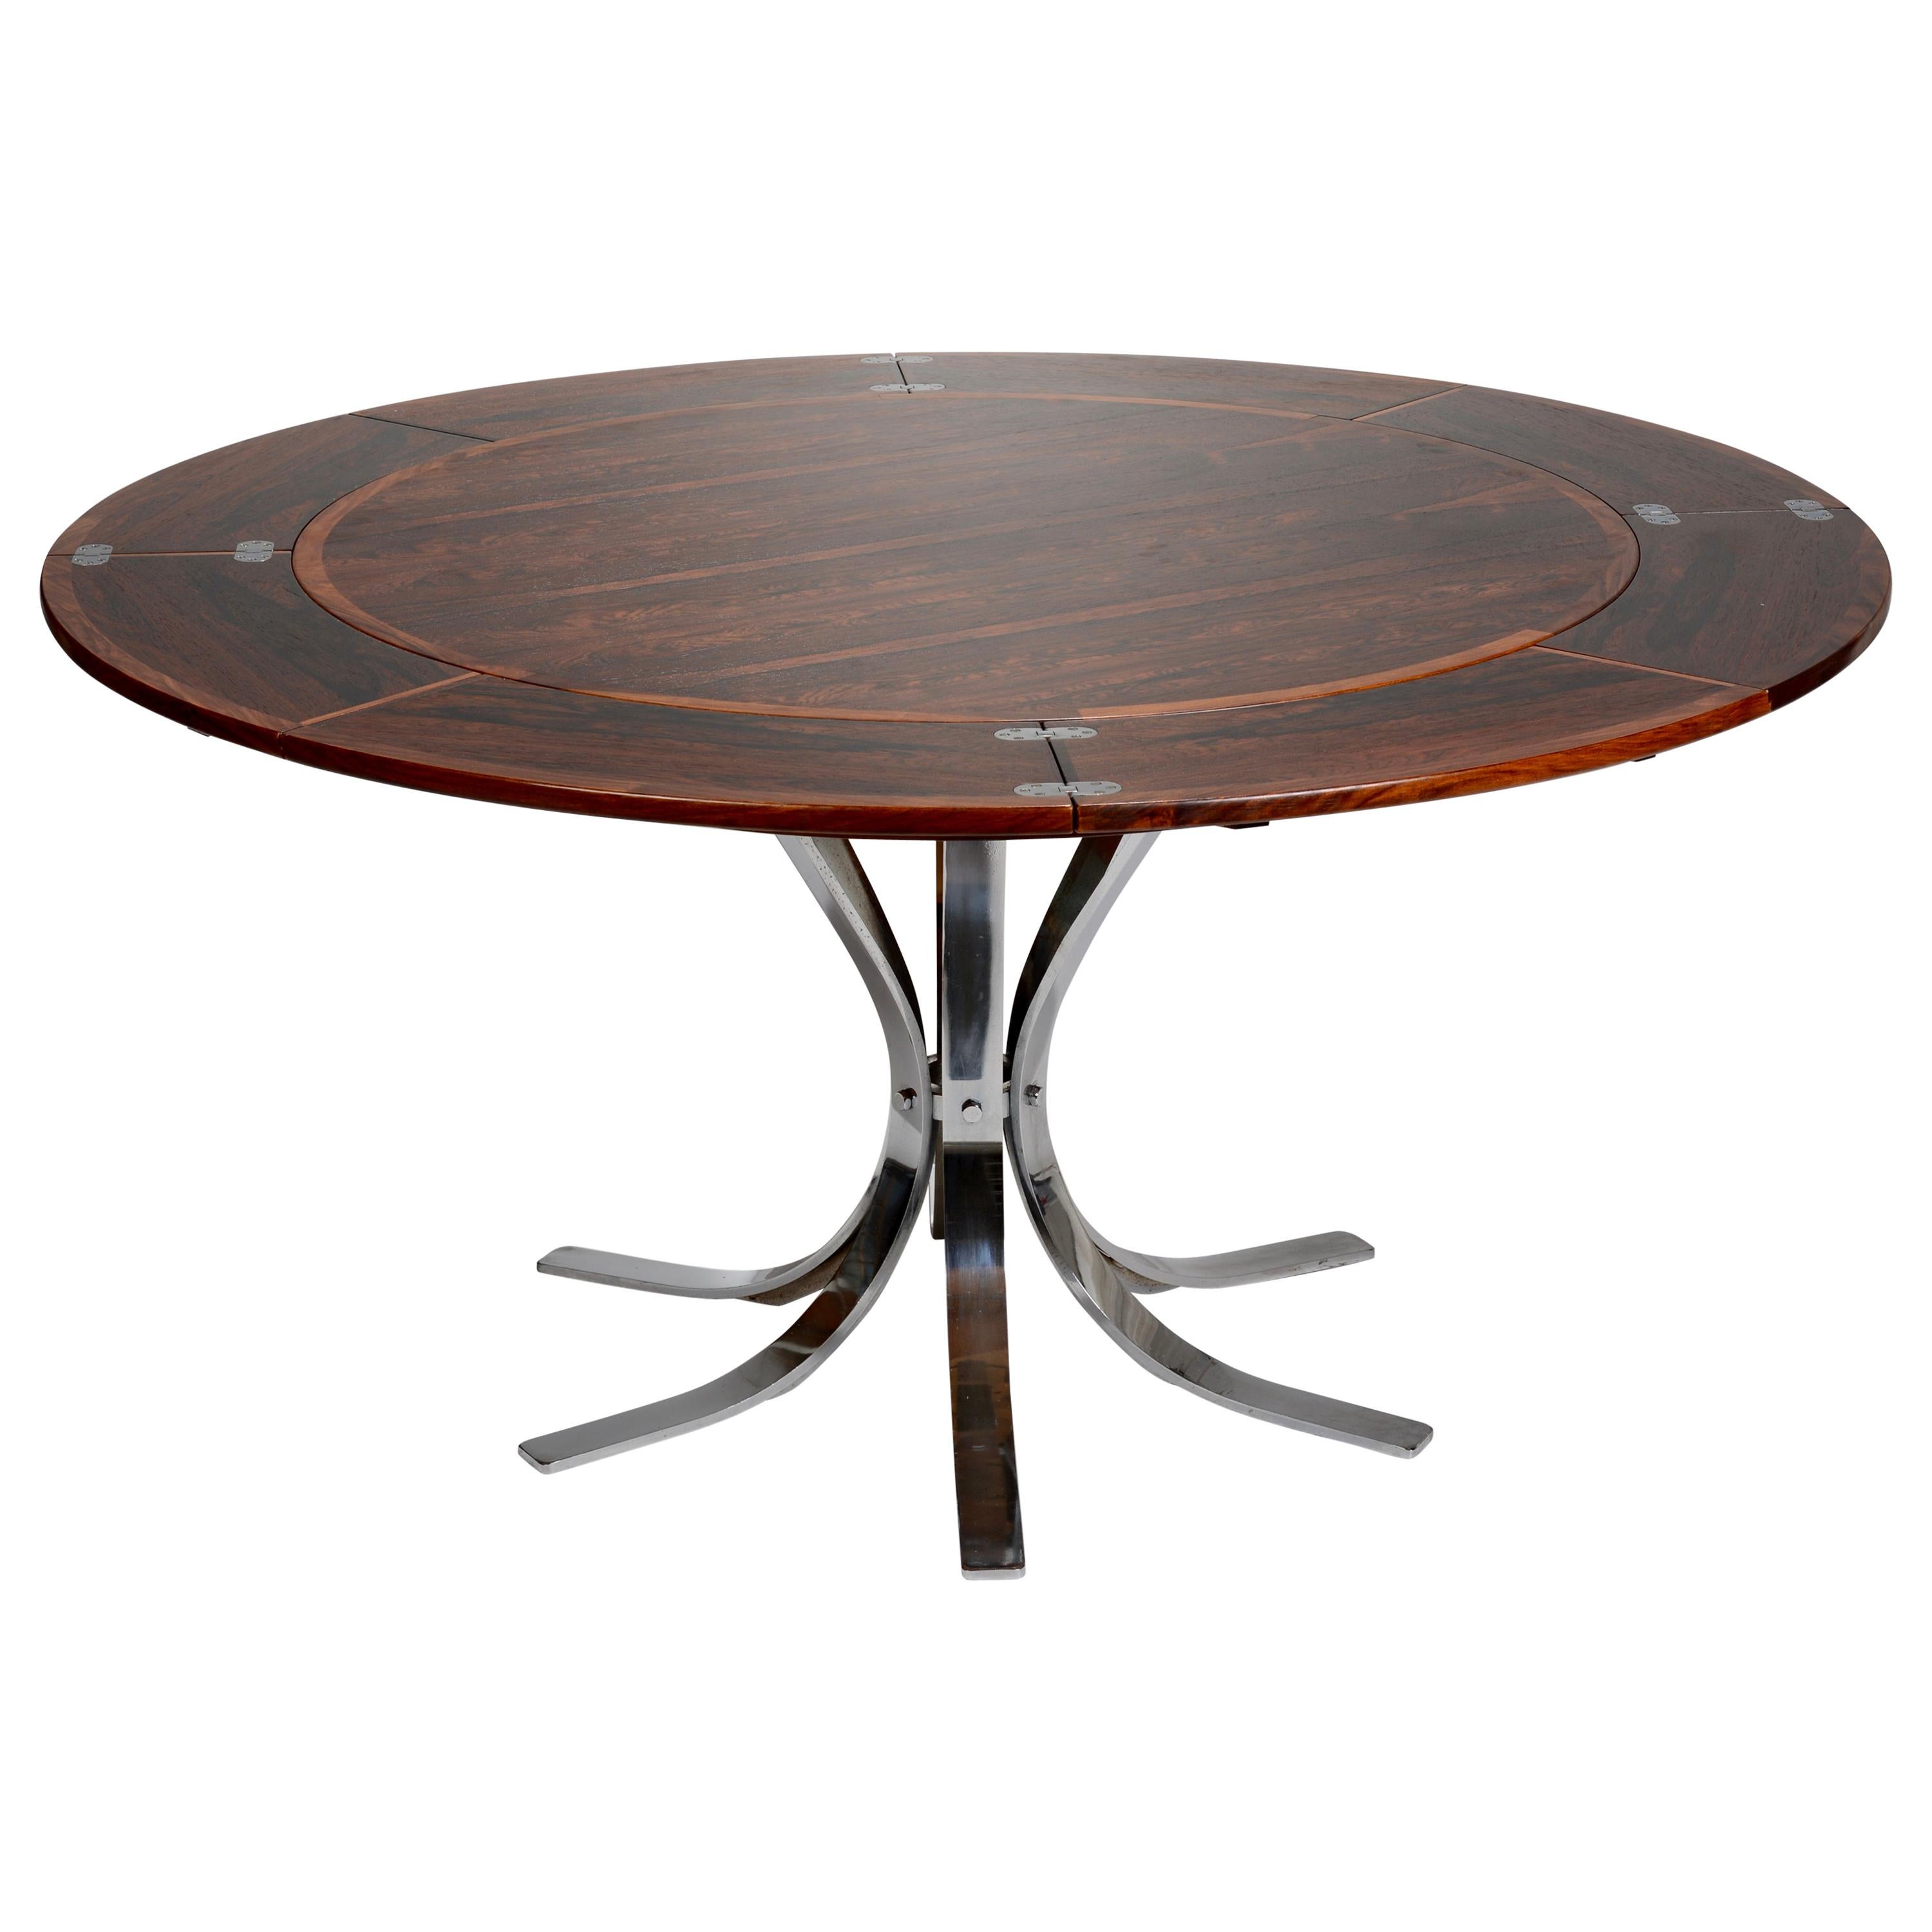 Danish Rosewood "Lotus Design" Dining Table by Dyrlund For Sale